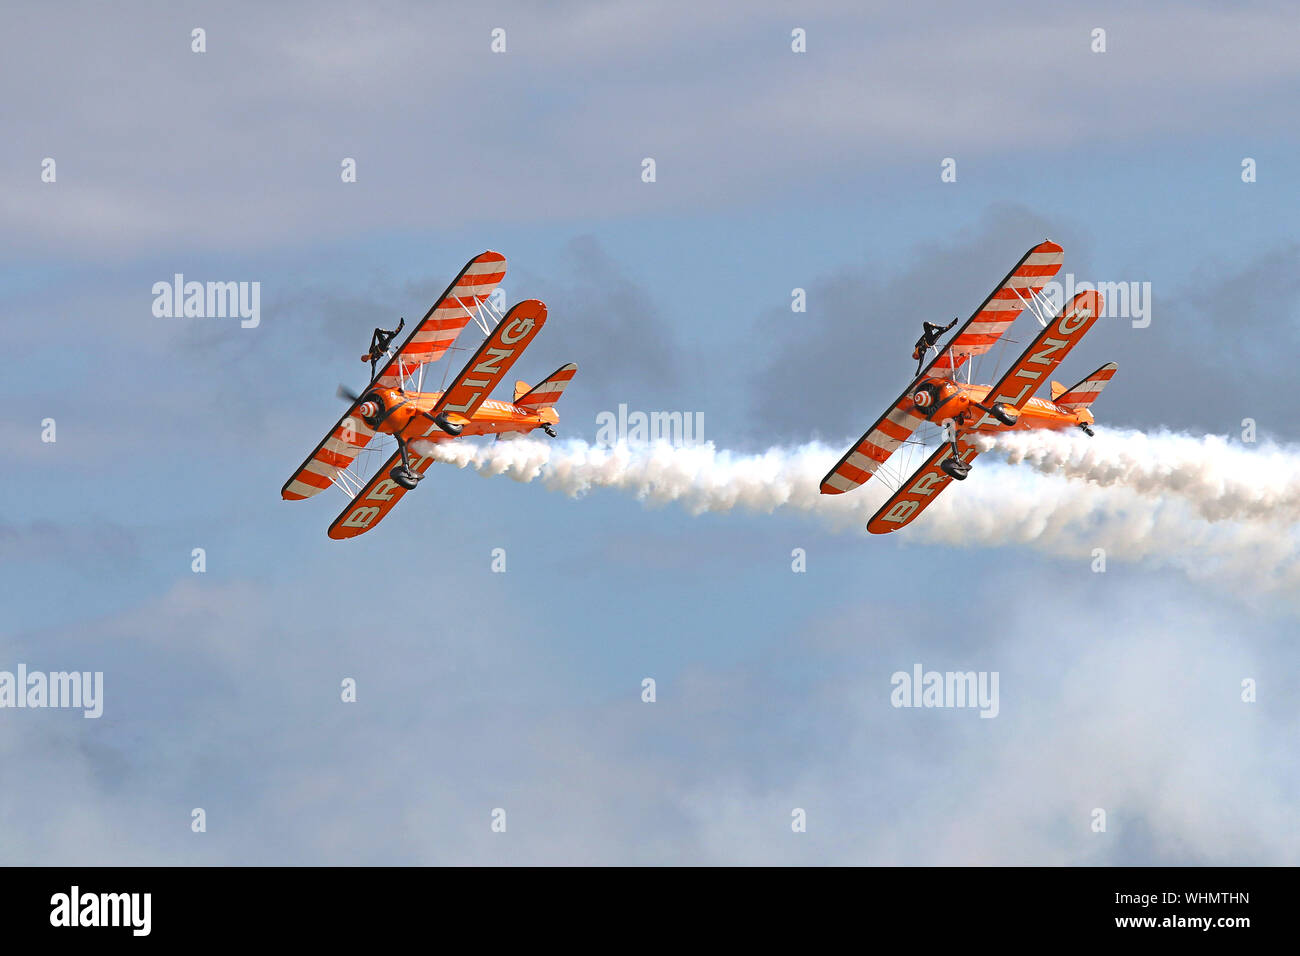 The Breitling Wingwalkers with their 1940's biplanes and the young ladies strapped on top wows the crowd at Eastbourne's International Airshow, 2017. Stock Photo